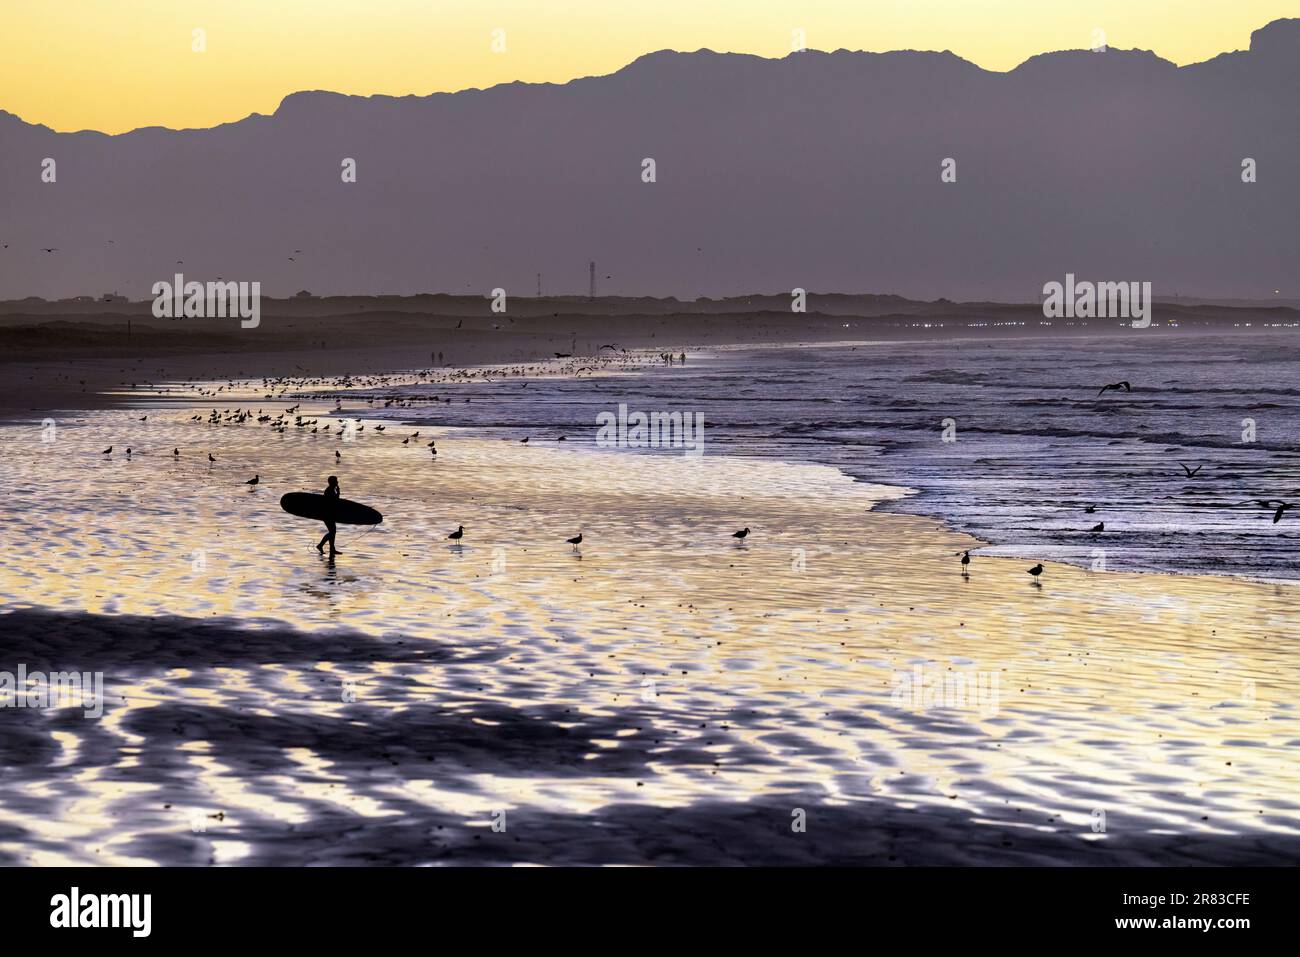 Surfer at sunrise on Muizenberg beach near Cape Town, South Africa Stock Photo